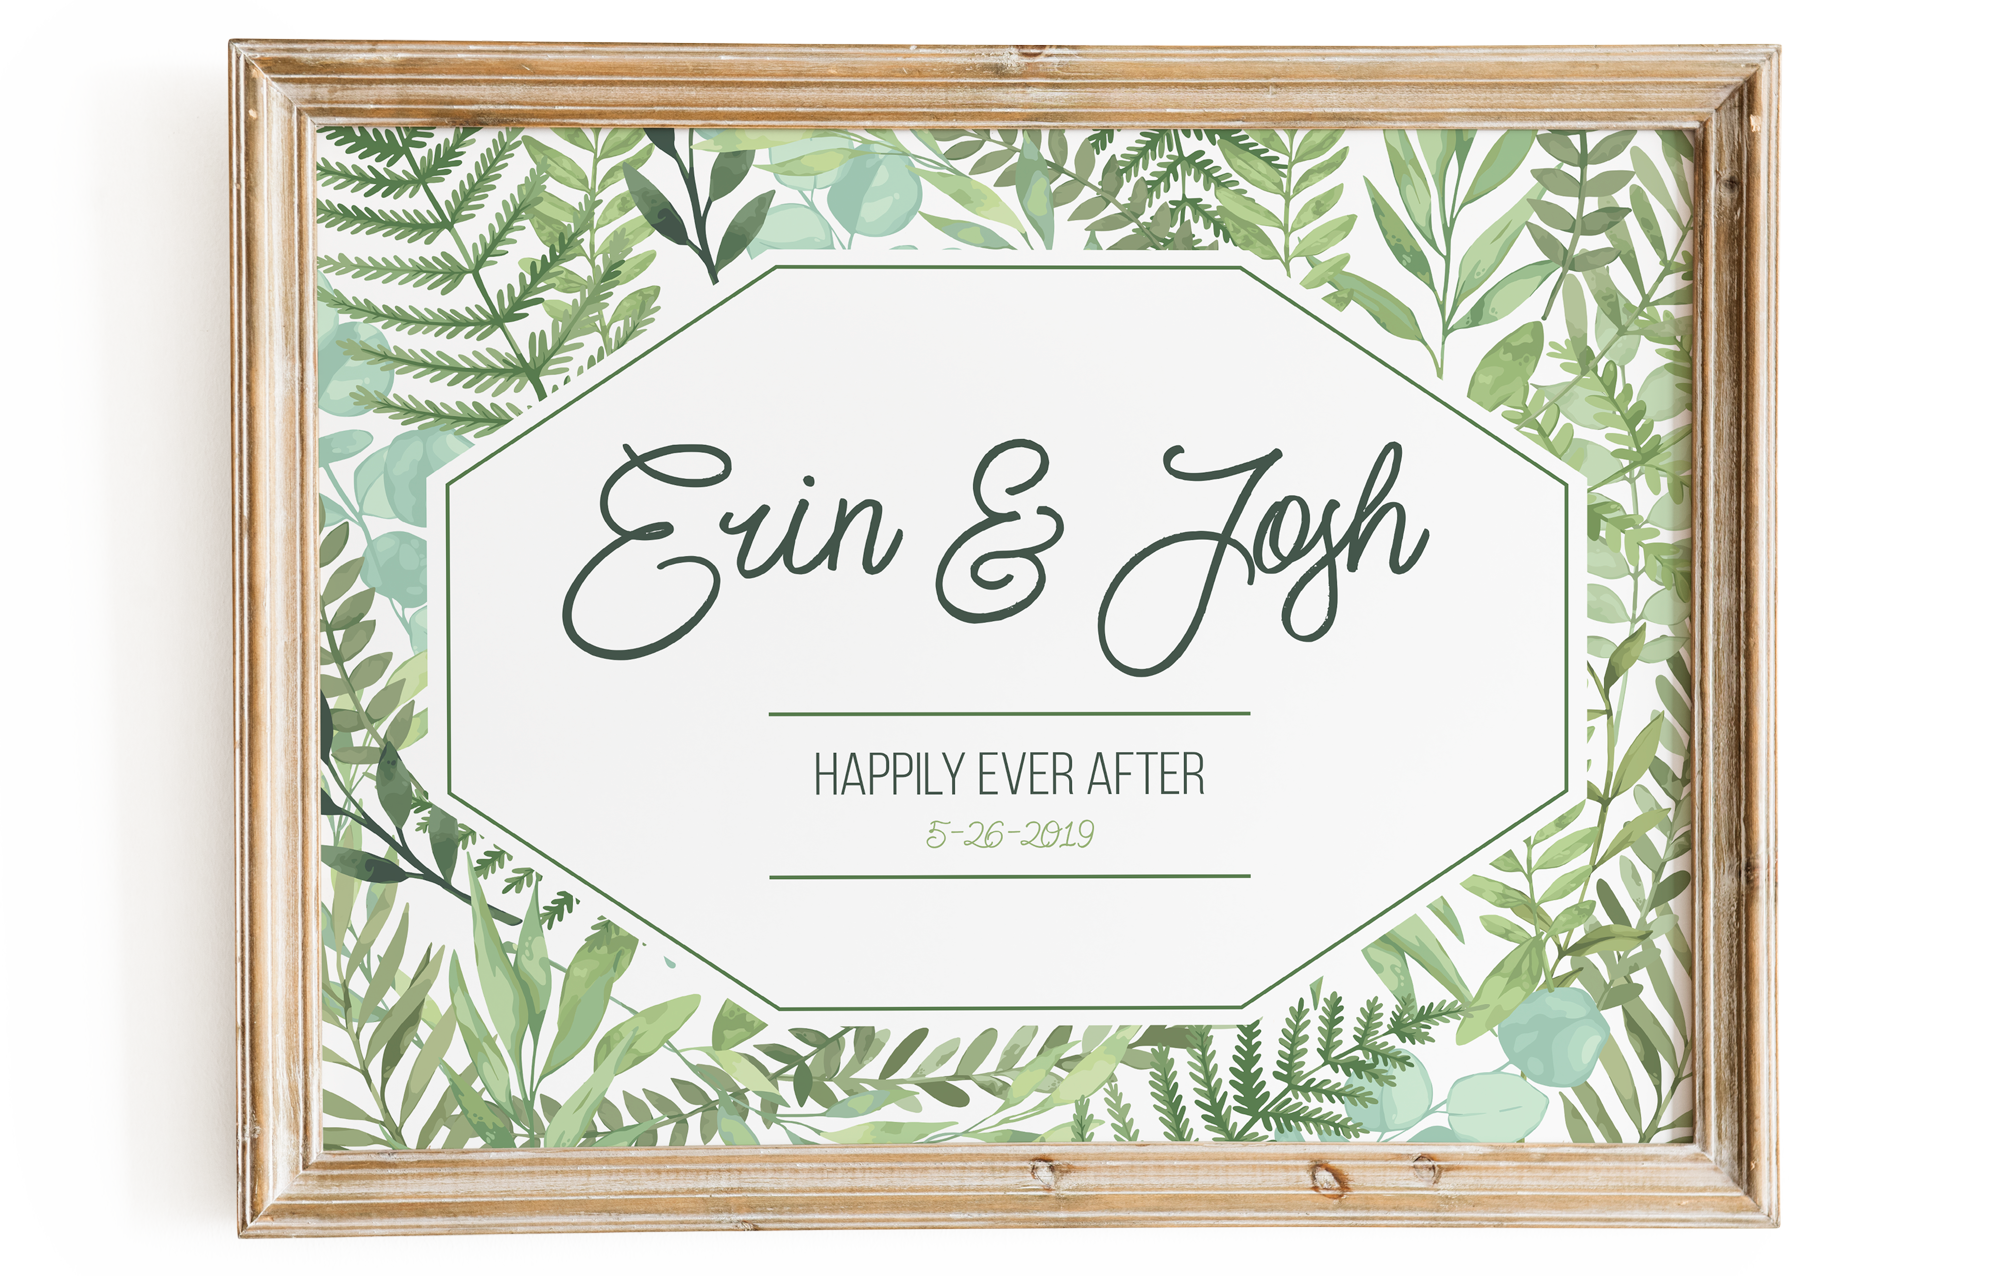 Personalized wedding sign gift